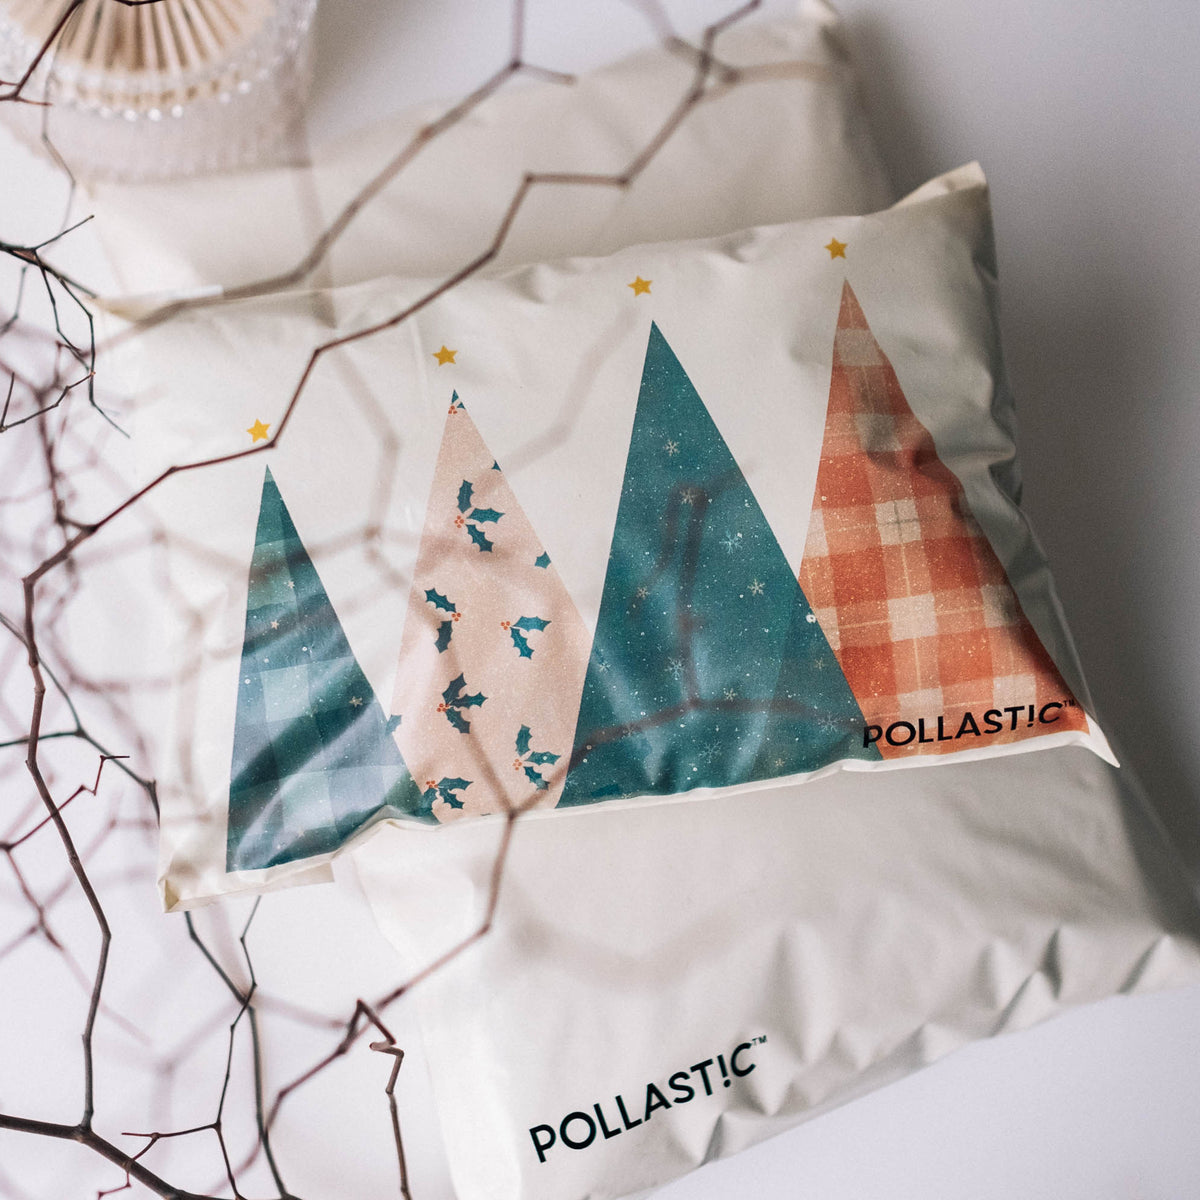 POLLAST!C Poly Mailers - Festive